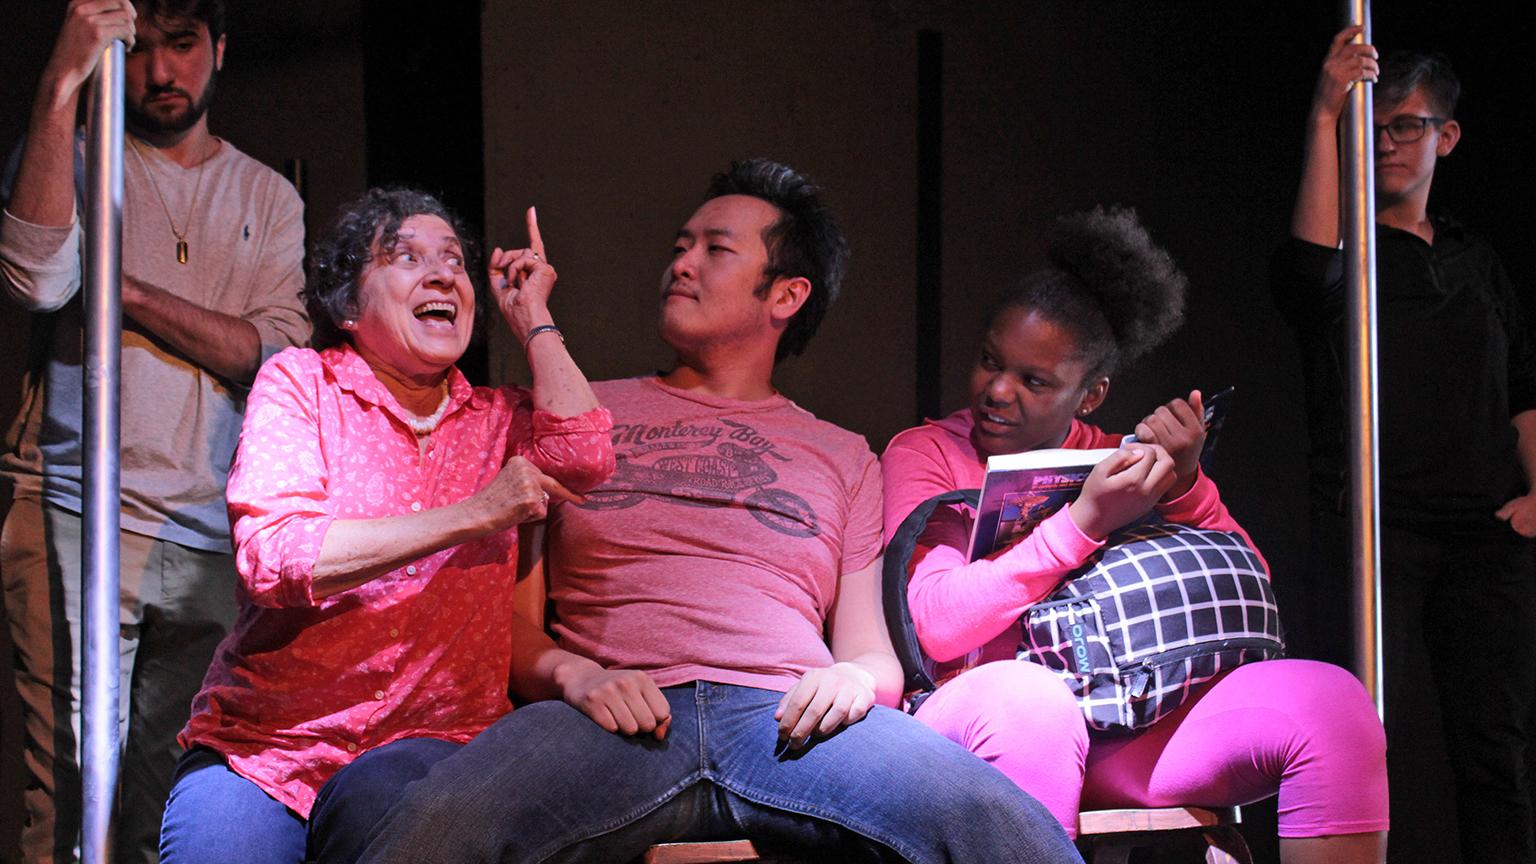 From left: Assistant stage manager Gabe Halsted-Alvarez, actors Joette Waters, Jian Zhang and Maya Hooks, and floor manager Sunniva Holmlund in “Manspread Madness,” one of seven short works about peace premiering as part of Collaboraction’s “Peacebook” Austin line-up. (Credit: Joel Maisonet)